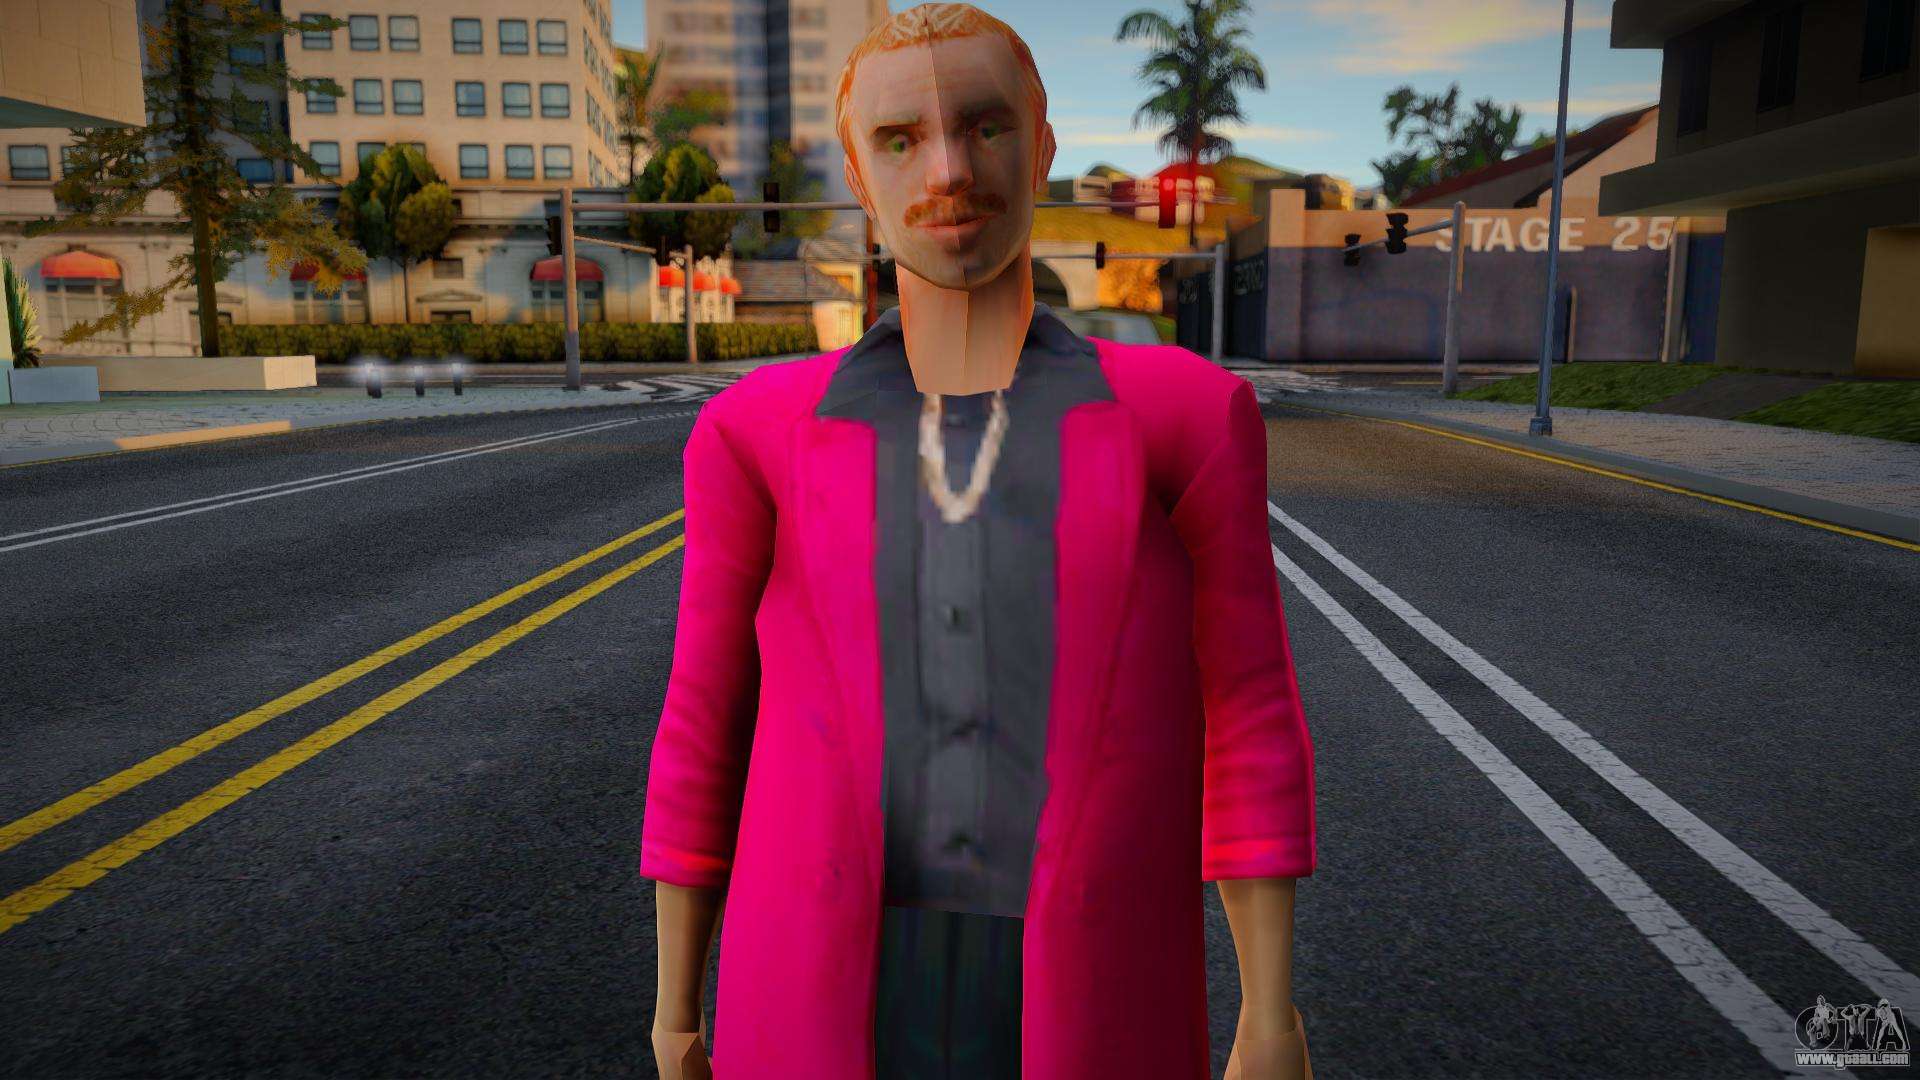 Andre in a red jacket for GTA San Andreas